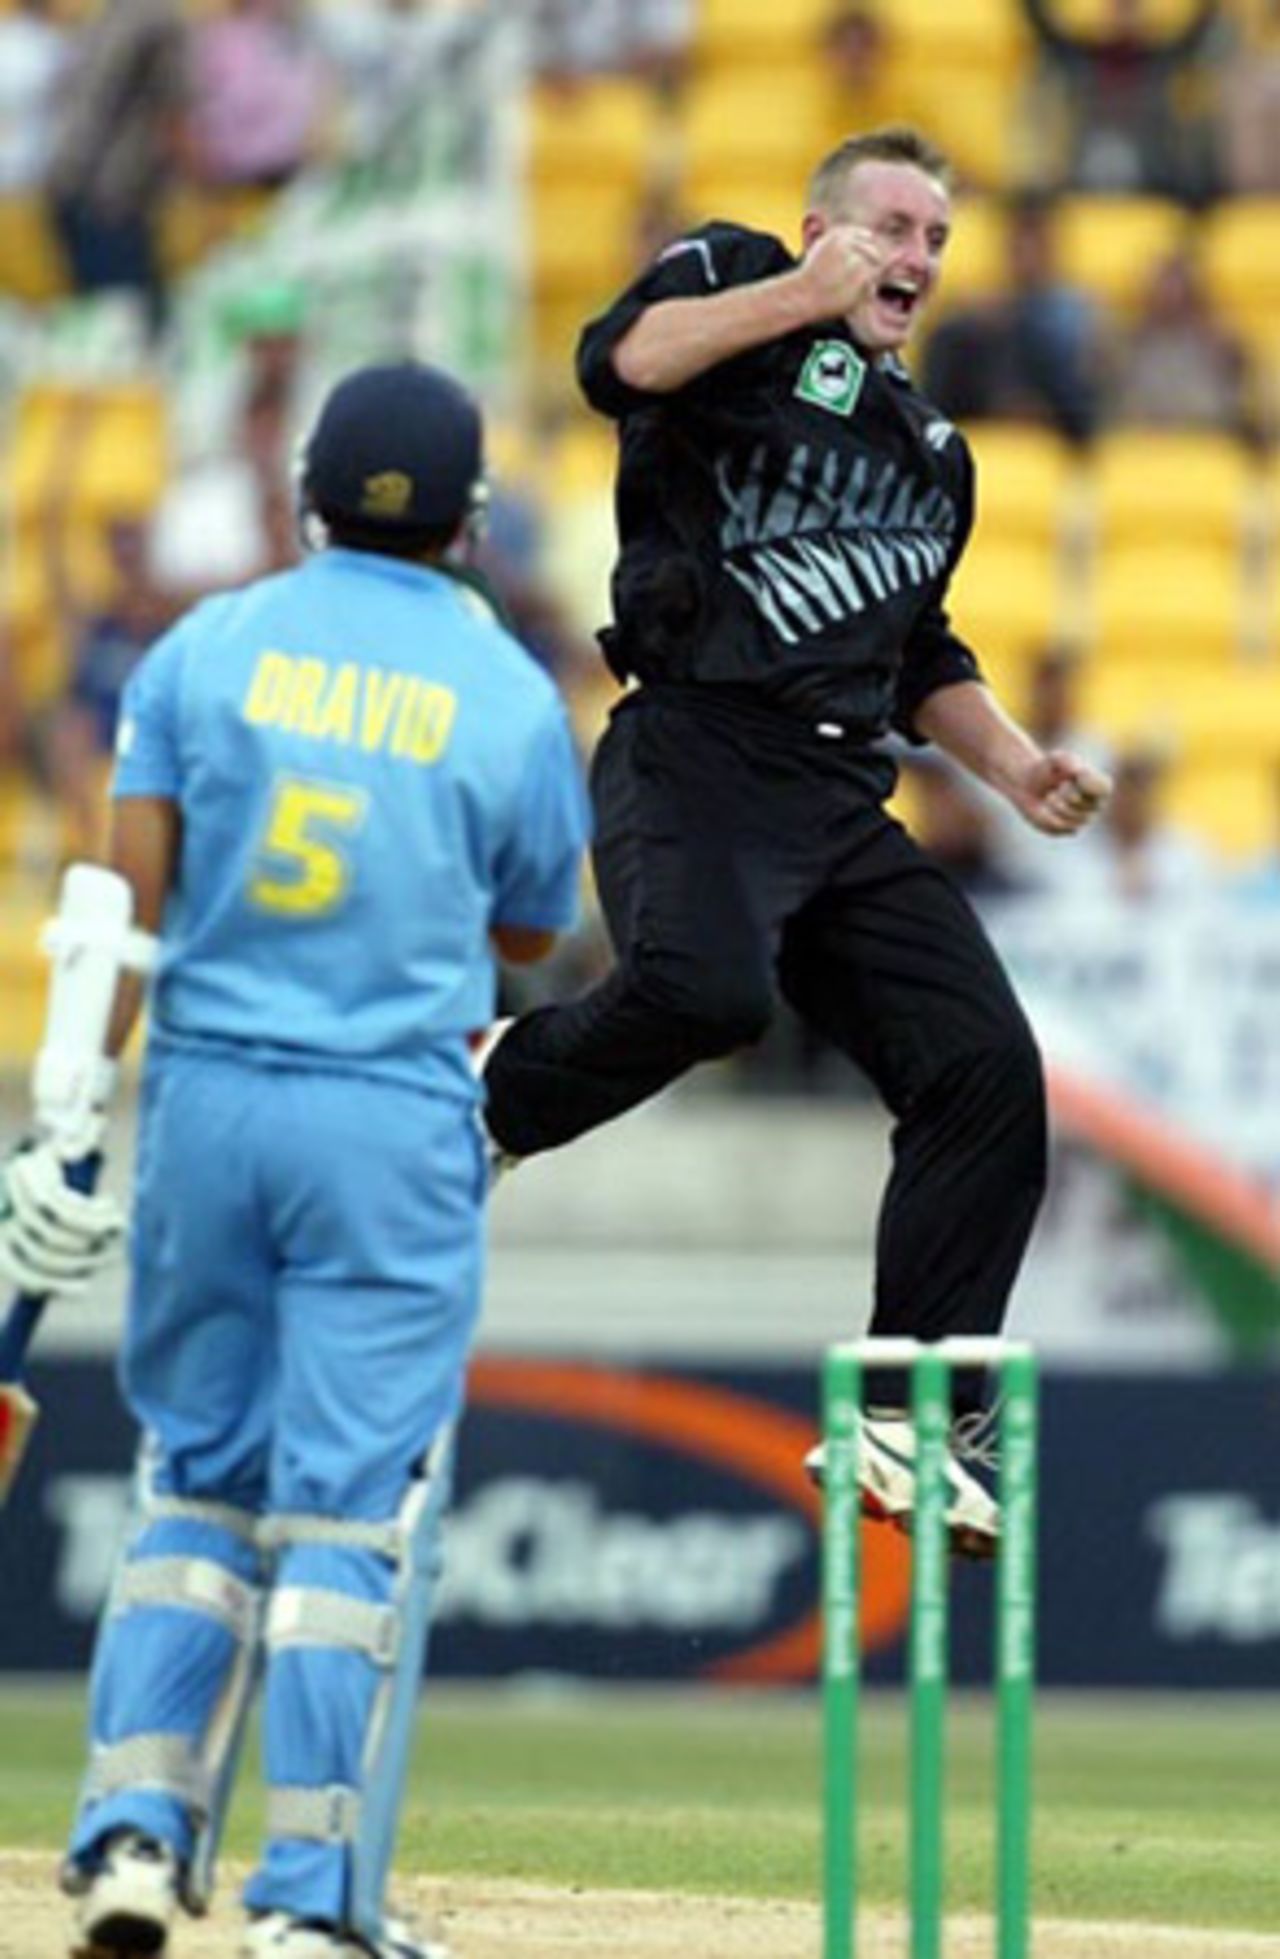 New Zealand bowler Scott Styris leaps to celebrate the dismissal of Indian batsman Rahul Dravid, caught by wicket-keeper Brendon McCullum for seven. 5th ODI: New Zealand v India at Westpac Stadium, Wellington, 8 January 2003.